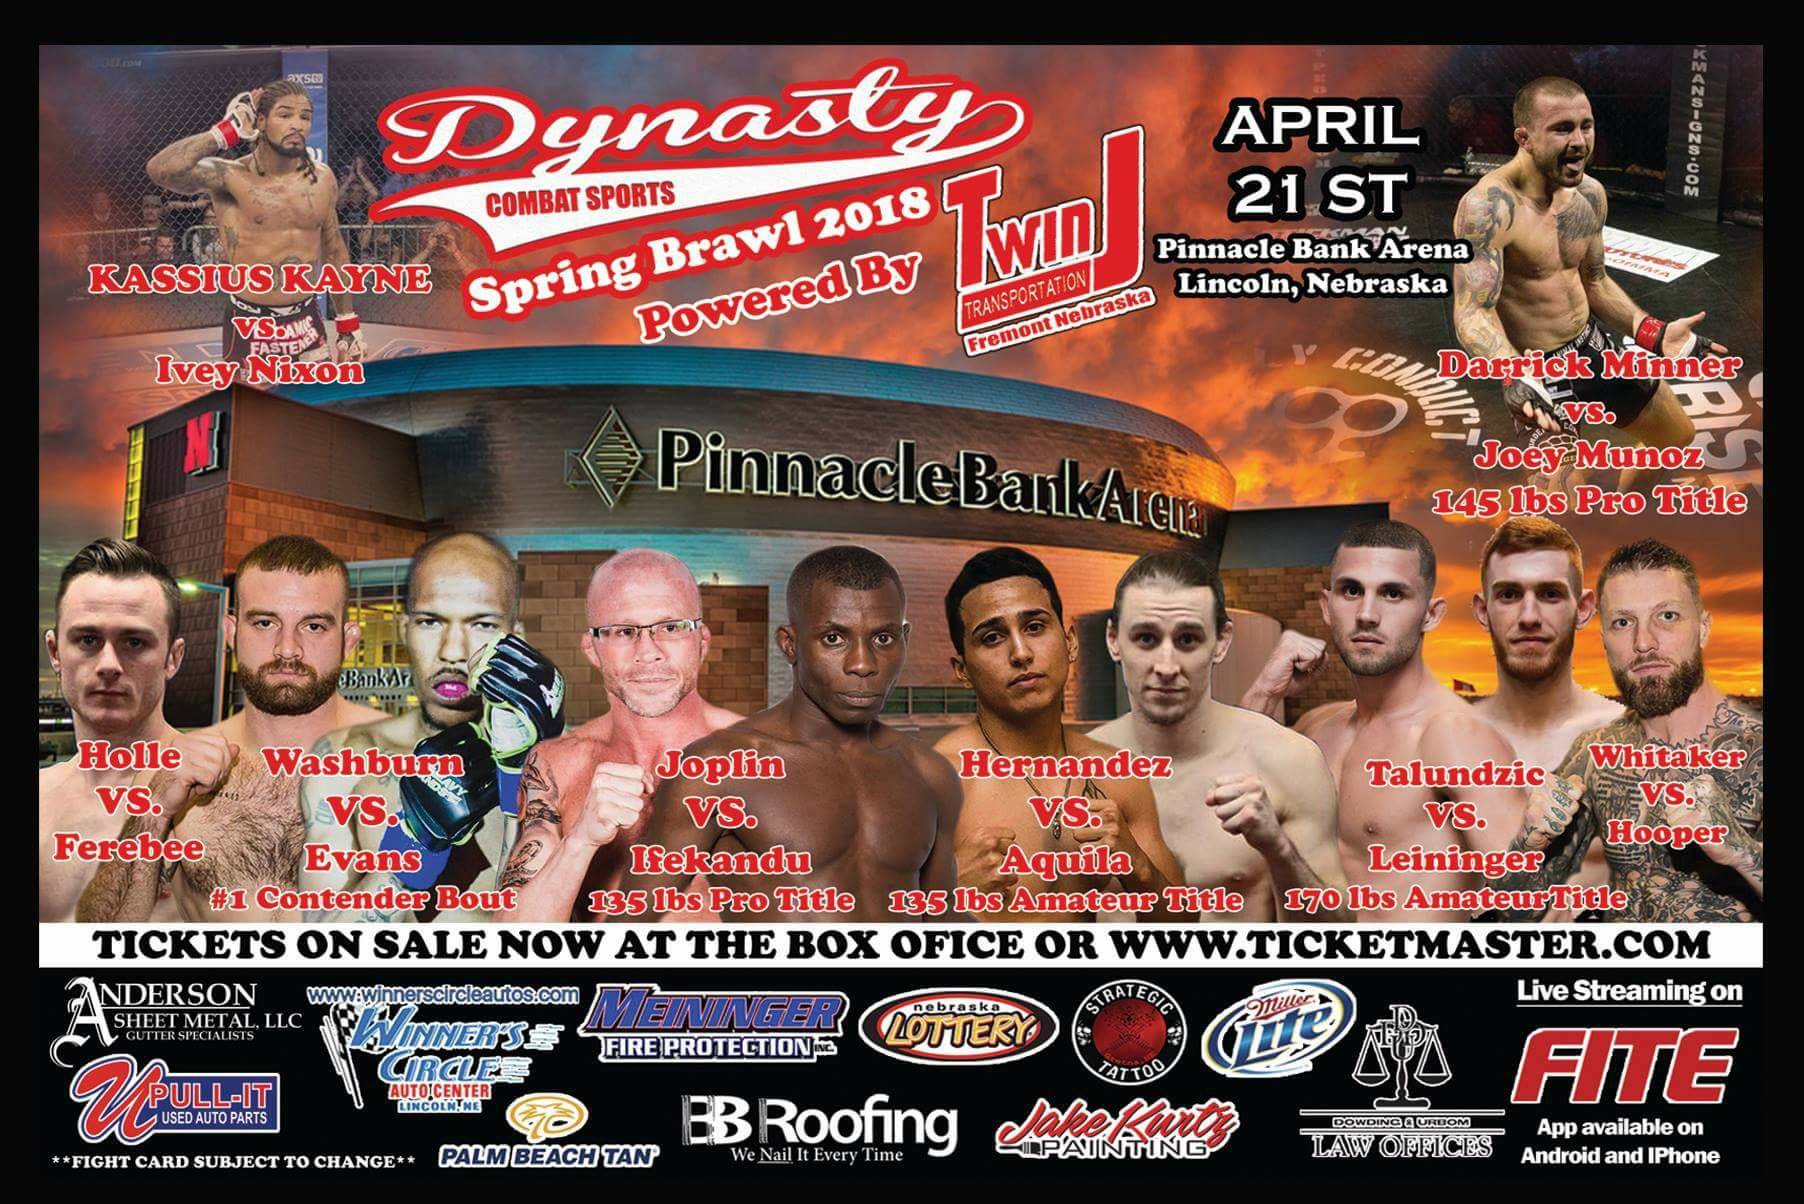 Dynasty Combat Sports 41 - Spring Brawl 2018 - Official PPV Live Stream